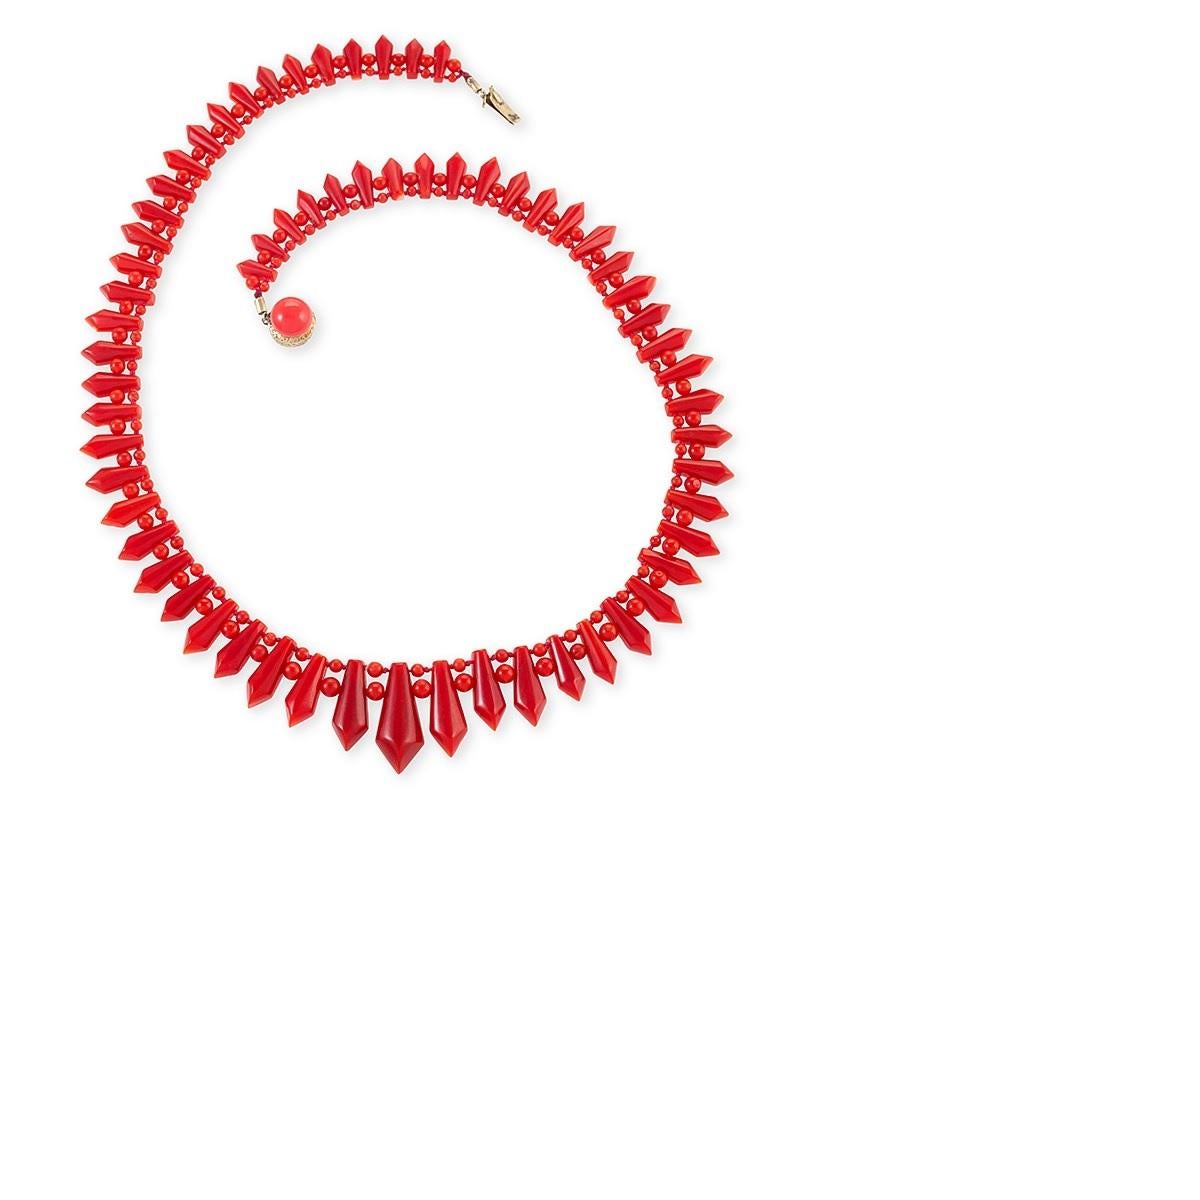 A natural, untreated oxblood color Sardinian coral necklace from the Mid-Victorian period.  Individual angular faceted graduated beads alternate with round beads to give the piece a freshly geometric look that suggests modern design, despite the